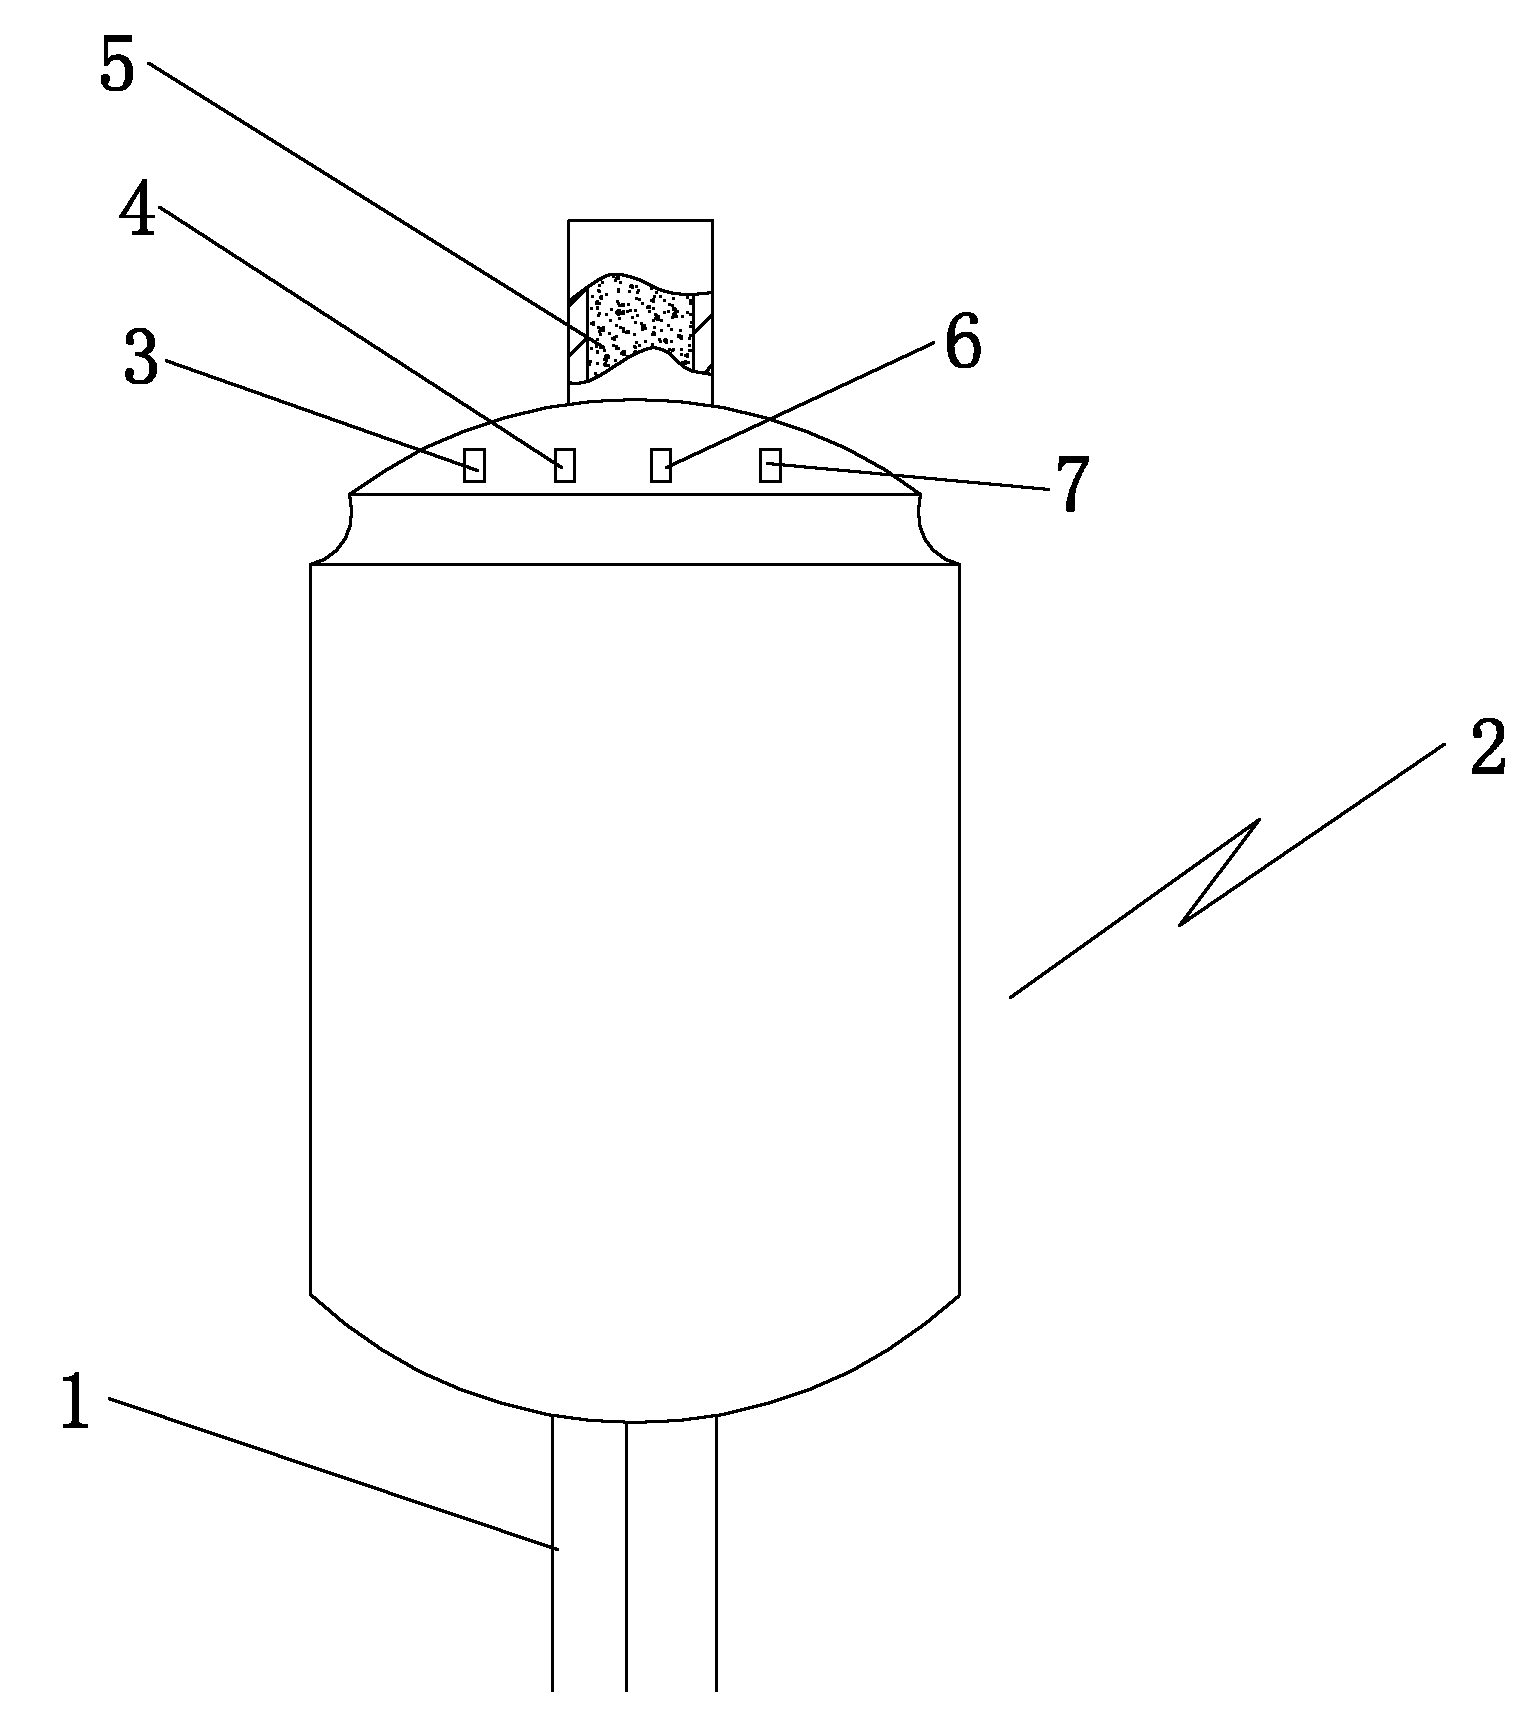 A special reaction kettle for the preparation of hydrofluoric acid